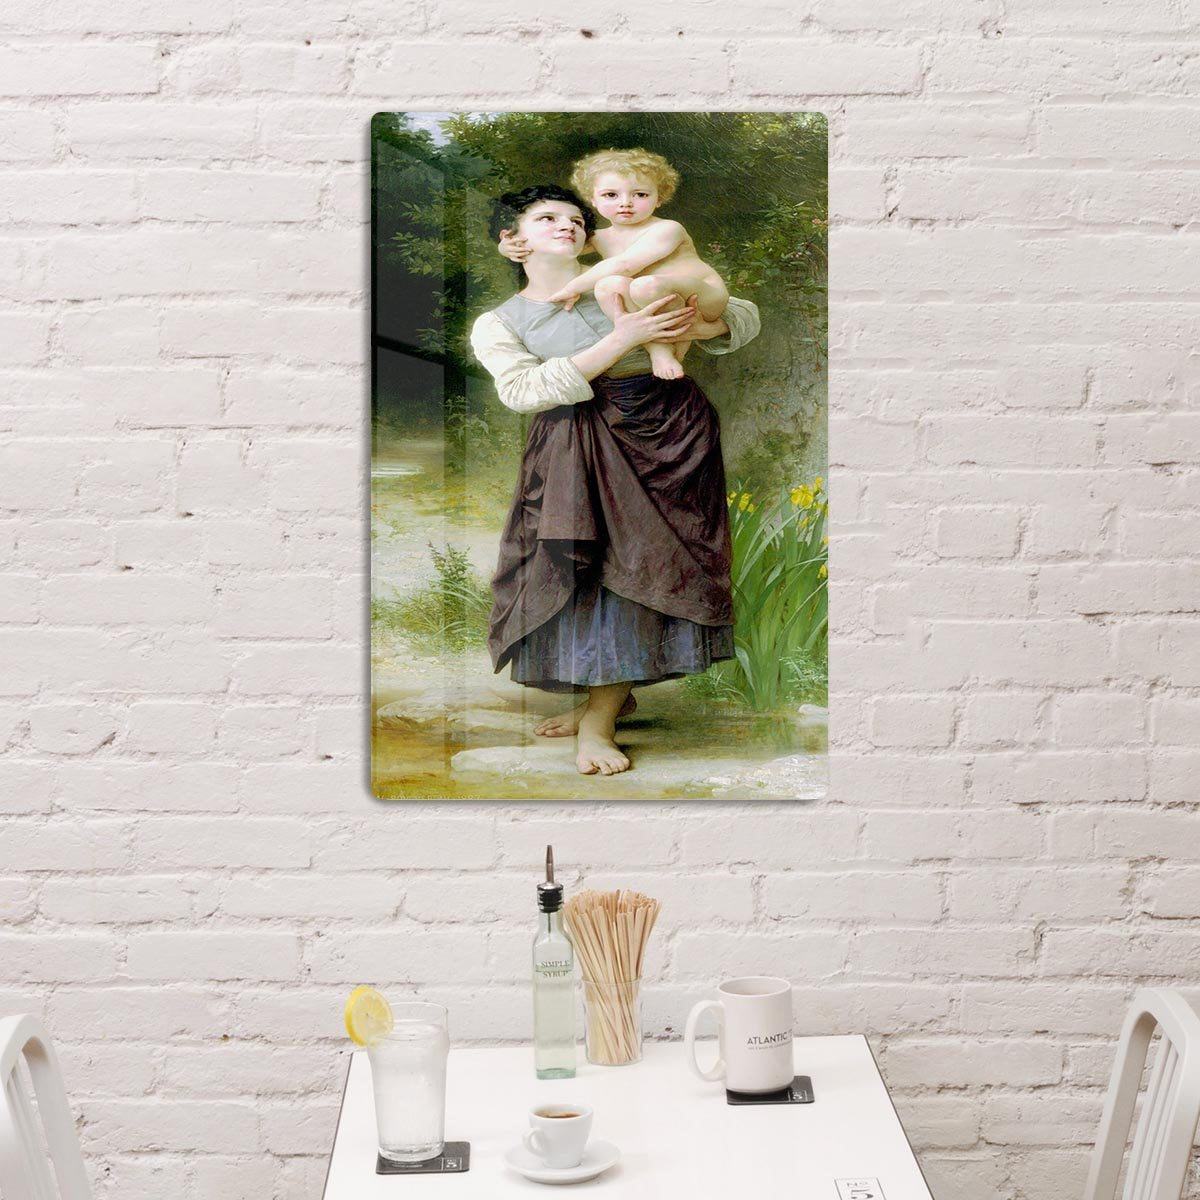 Brother And Sister By Bouguereau HD Metal Print